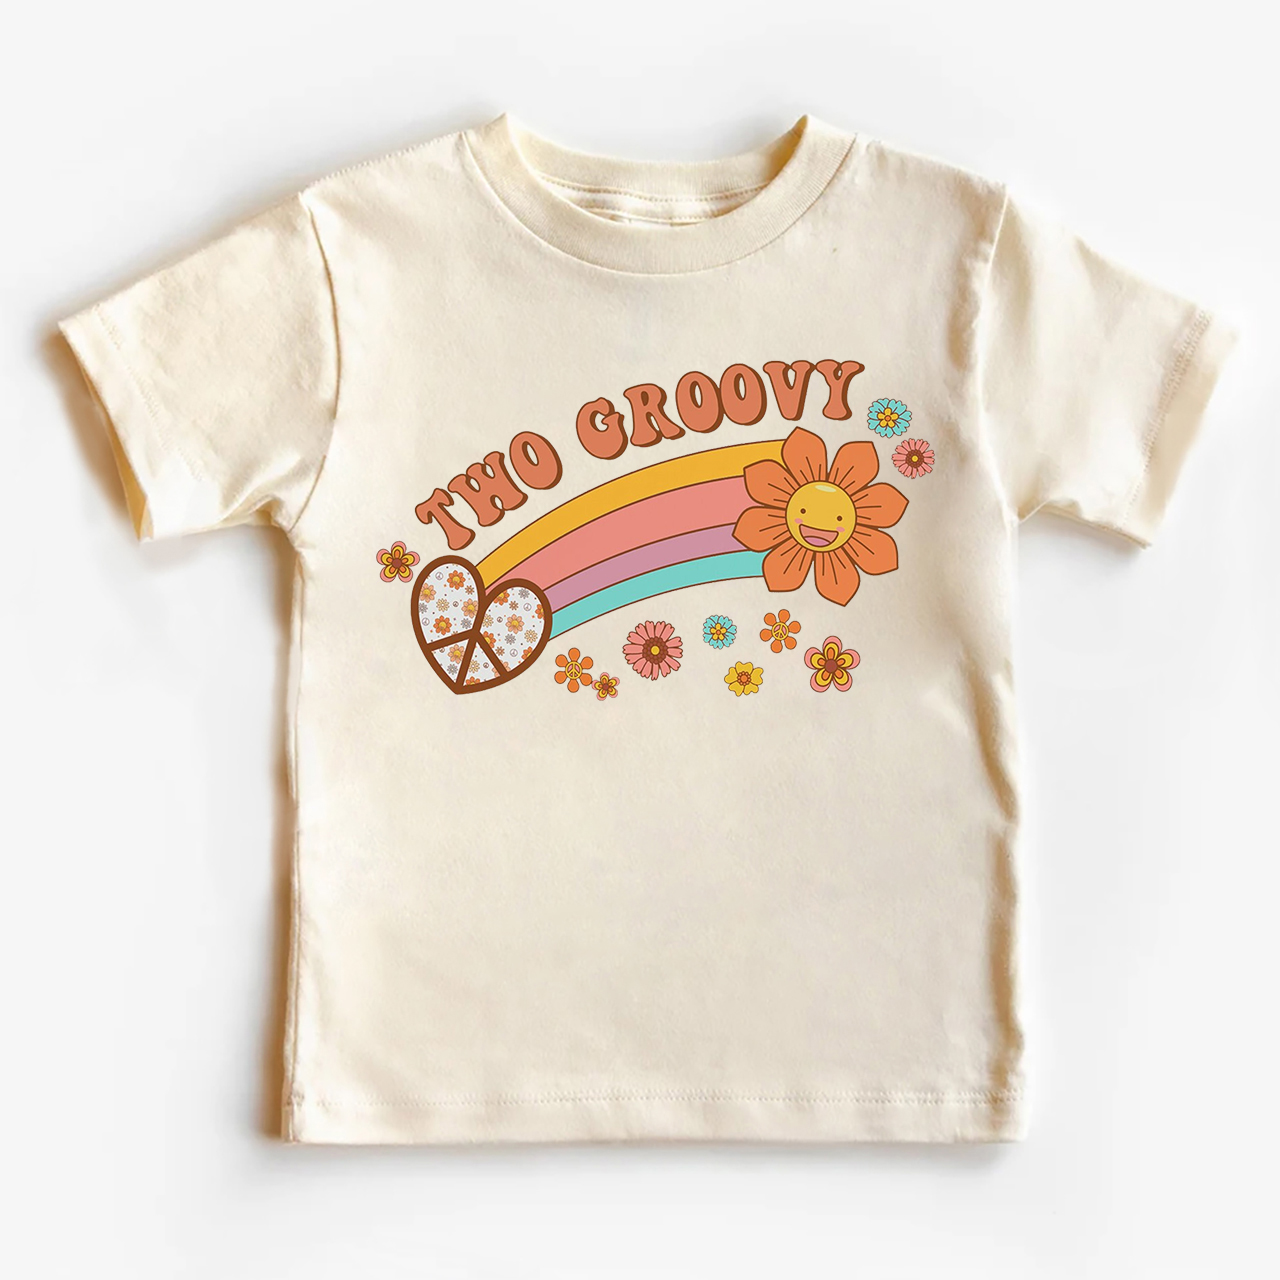 Two Groovy 2nd Birthday Shirt For Kids